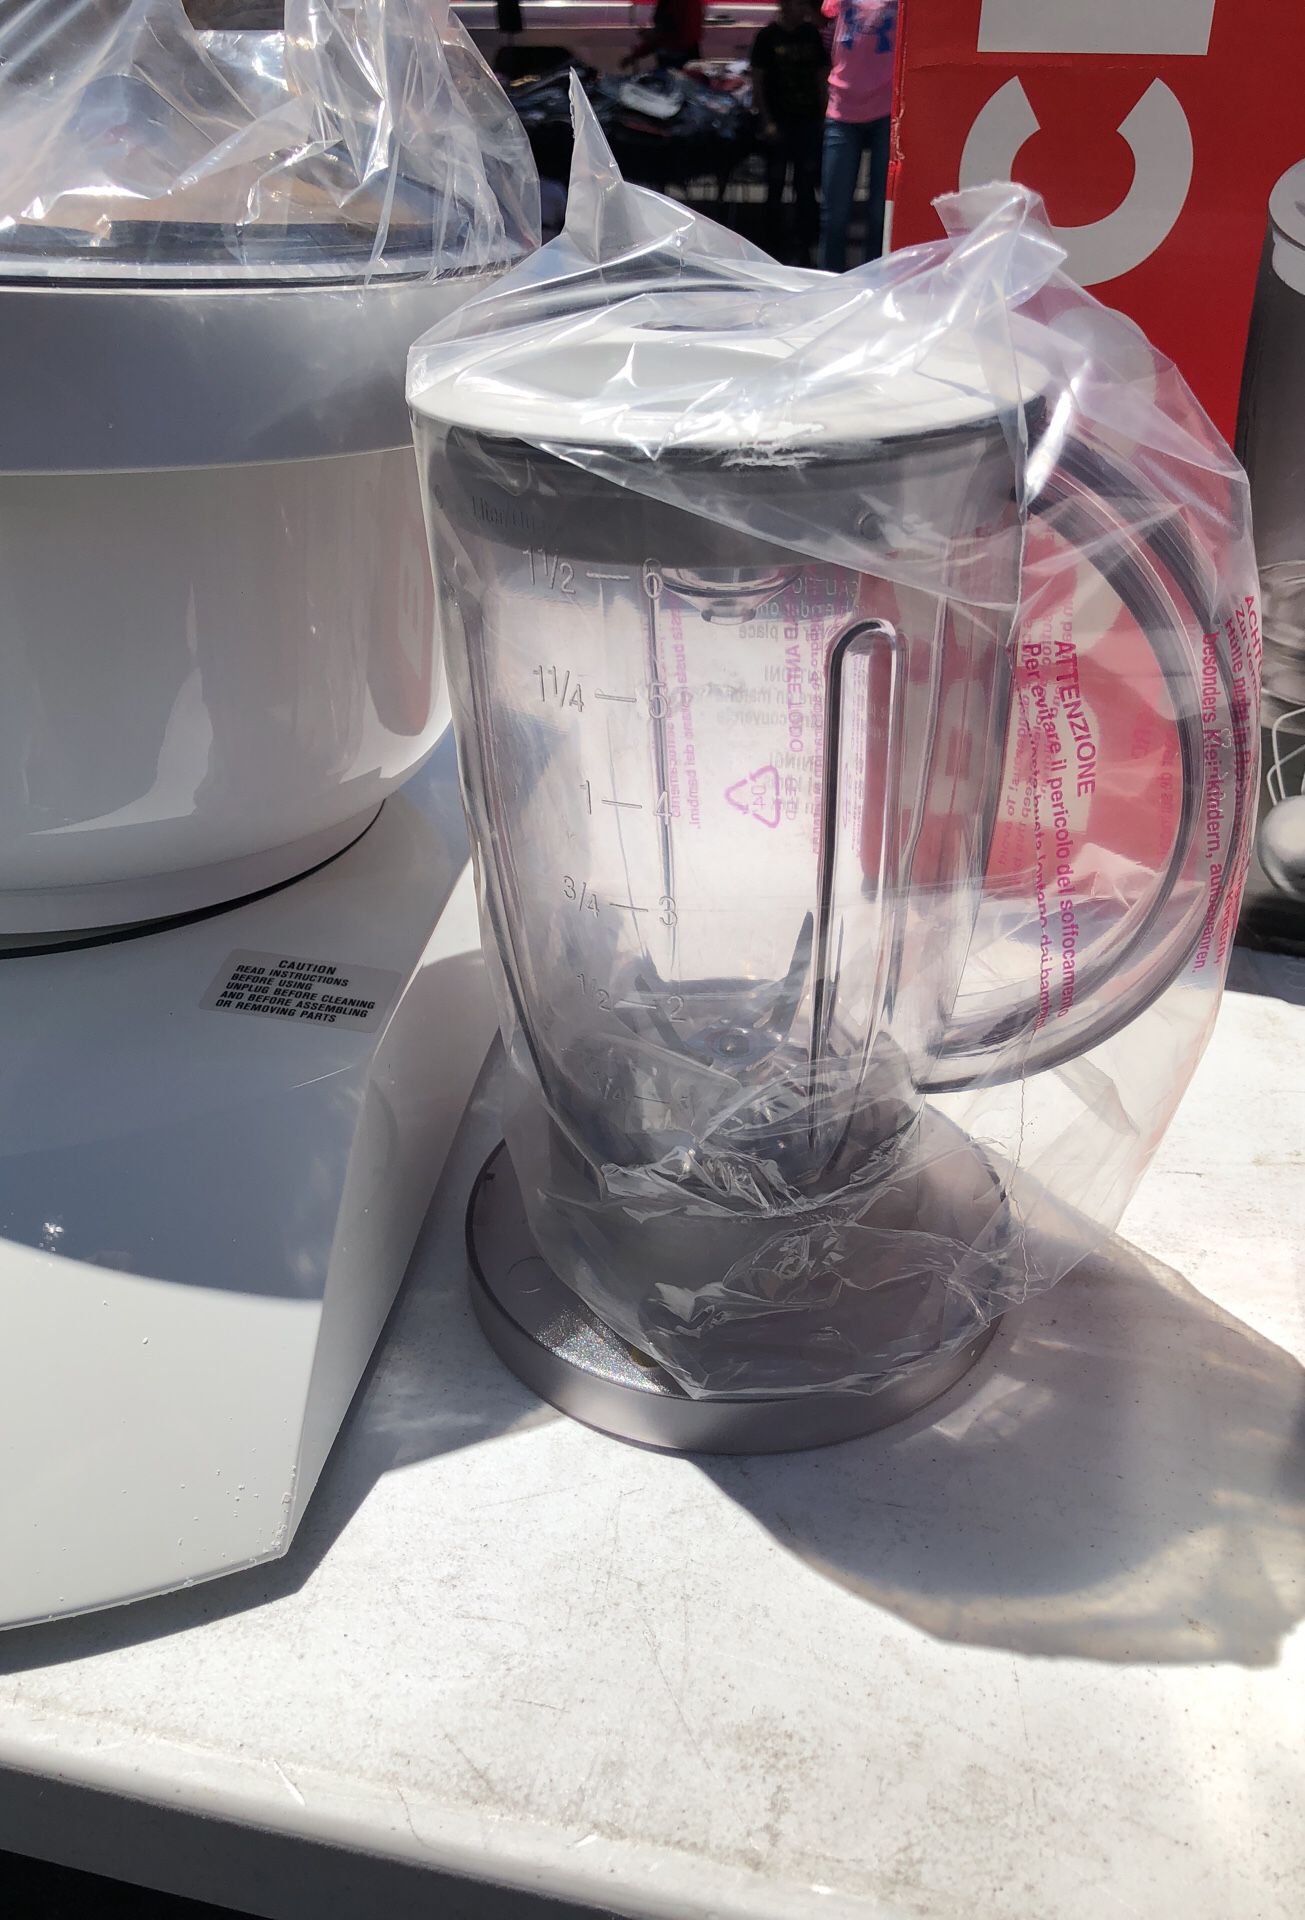 KITCHENETICS K-11 THE KITCHEN MACHINE GOURMET CHAMP FOOD PROCESSOR GERMANY  MIXER. Very similar to Bosch Mixer for Sale in Taylorsville, UT - OfferUp